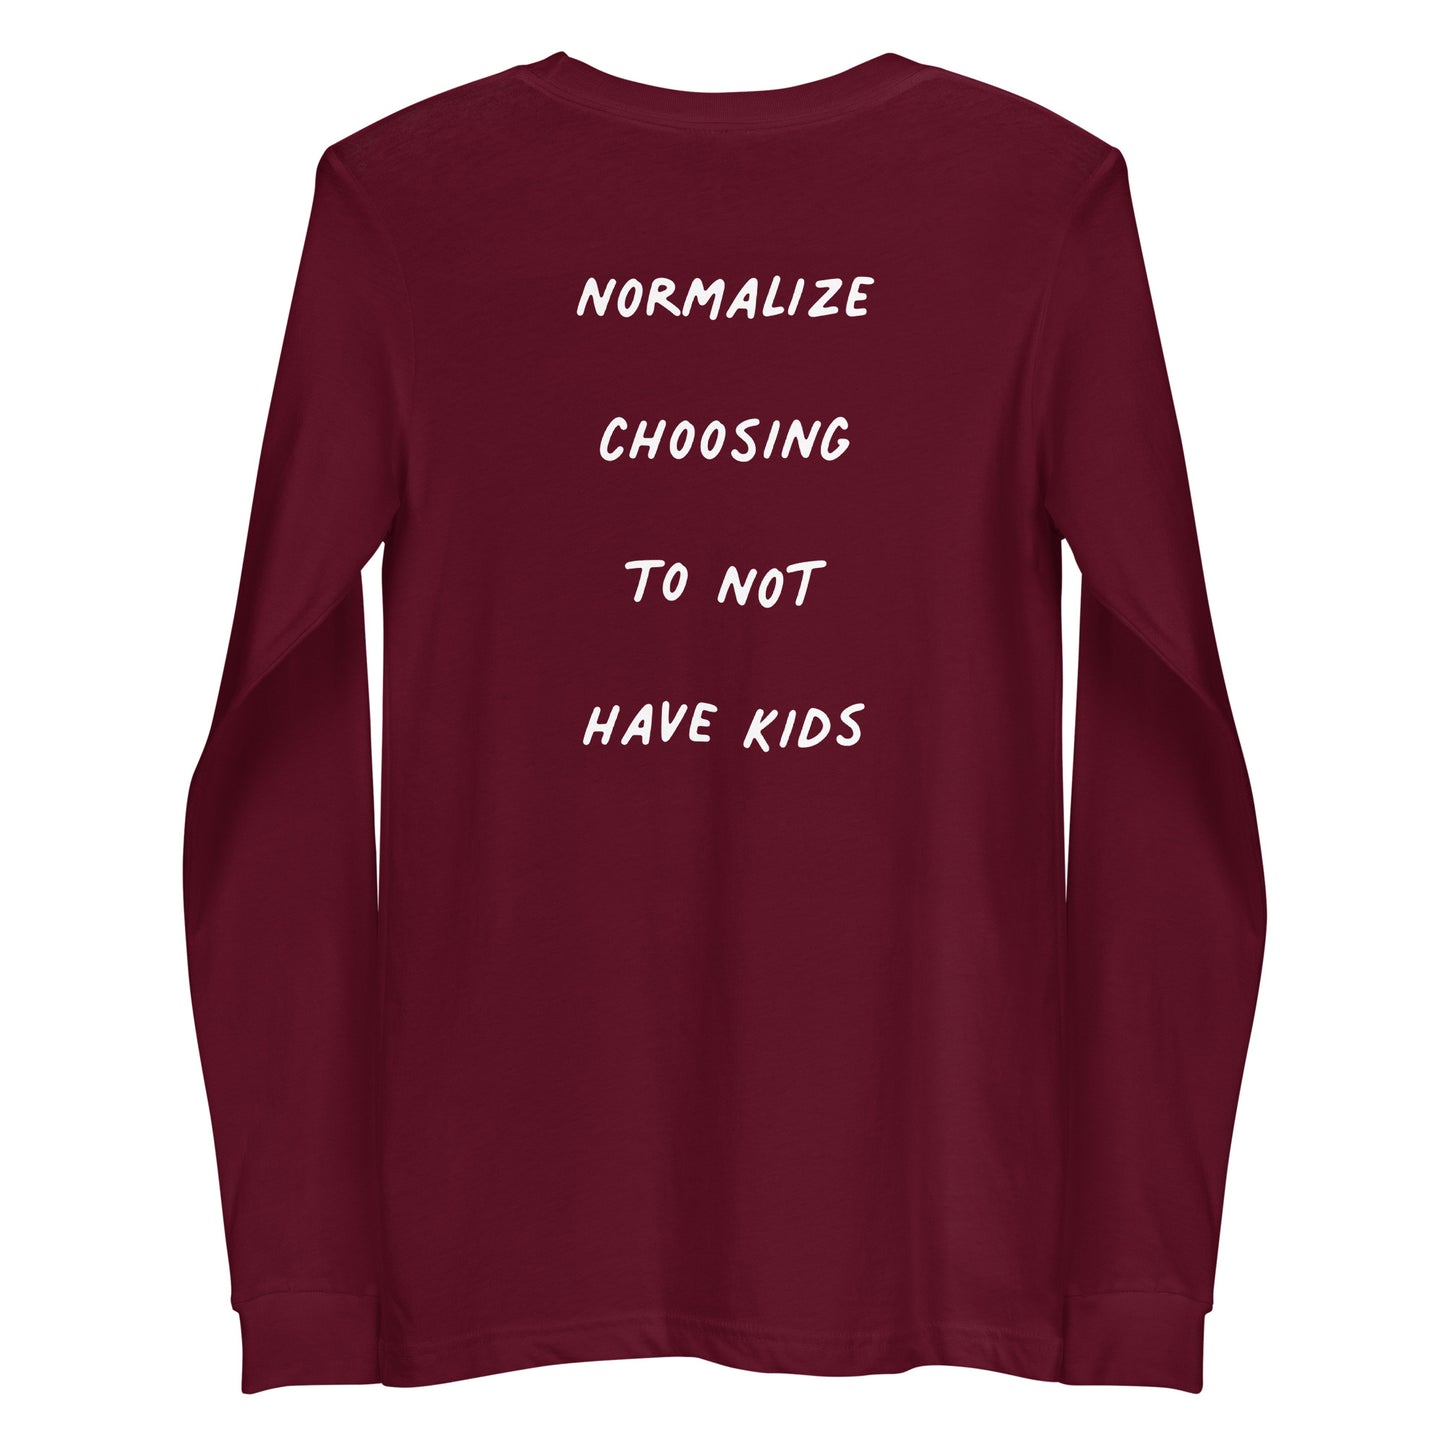 Normalize Choosing To Not Have Kids Unisex Long Sleeve Shirt